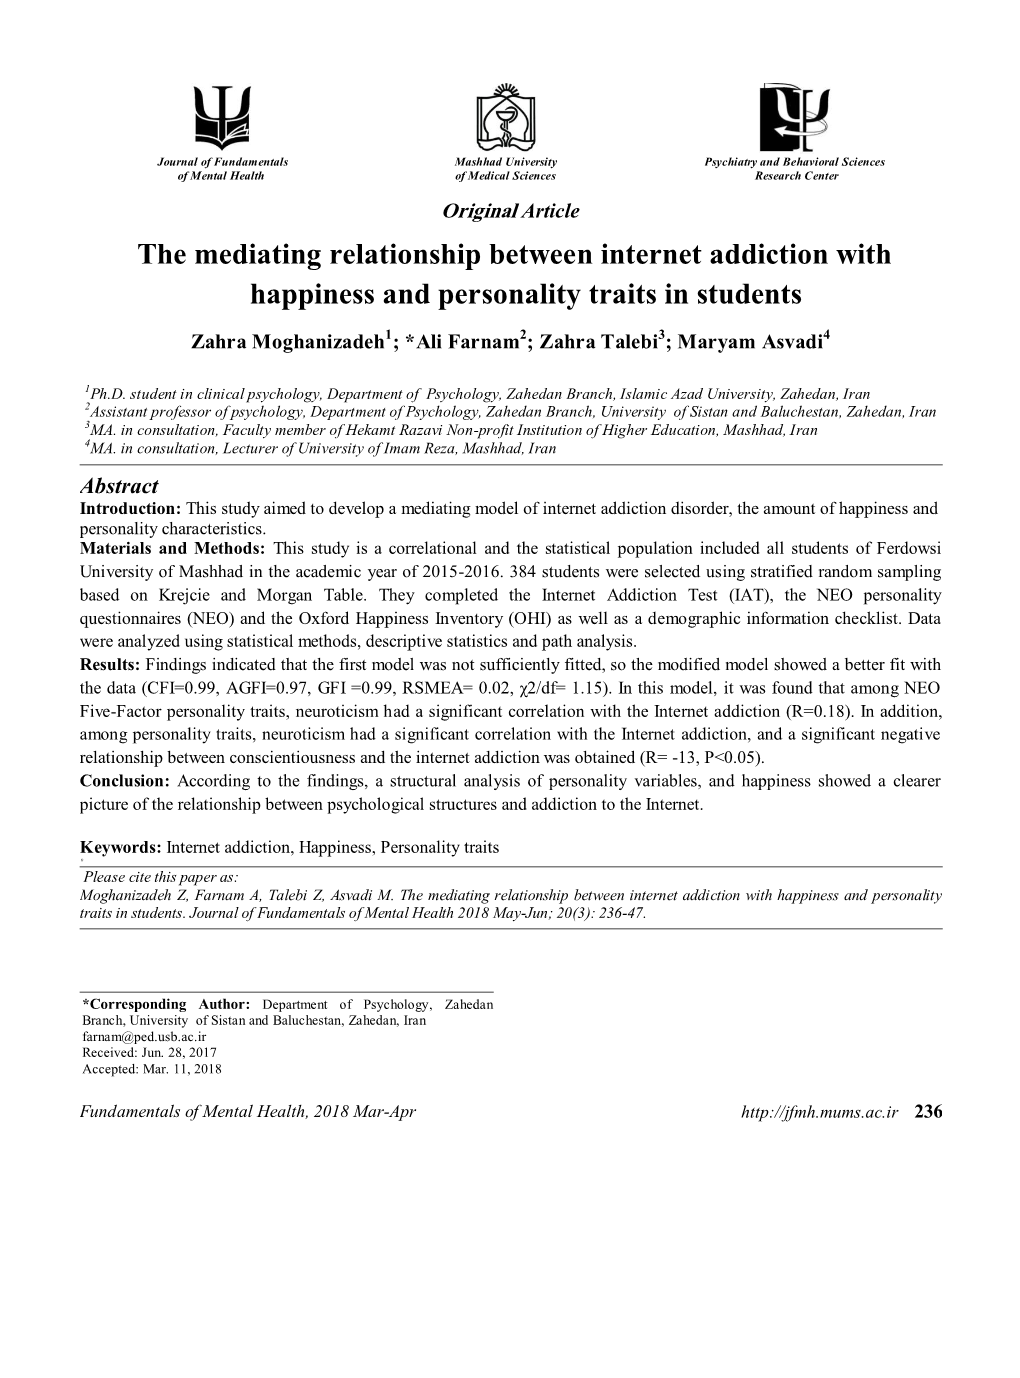 The Mediating Relationship Between Internet Addiction with Happiness and Personality Traits in Students